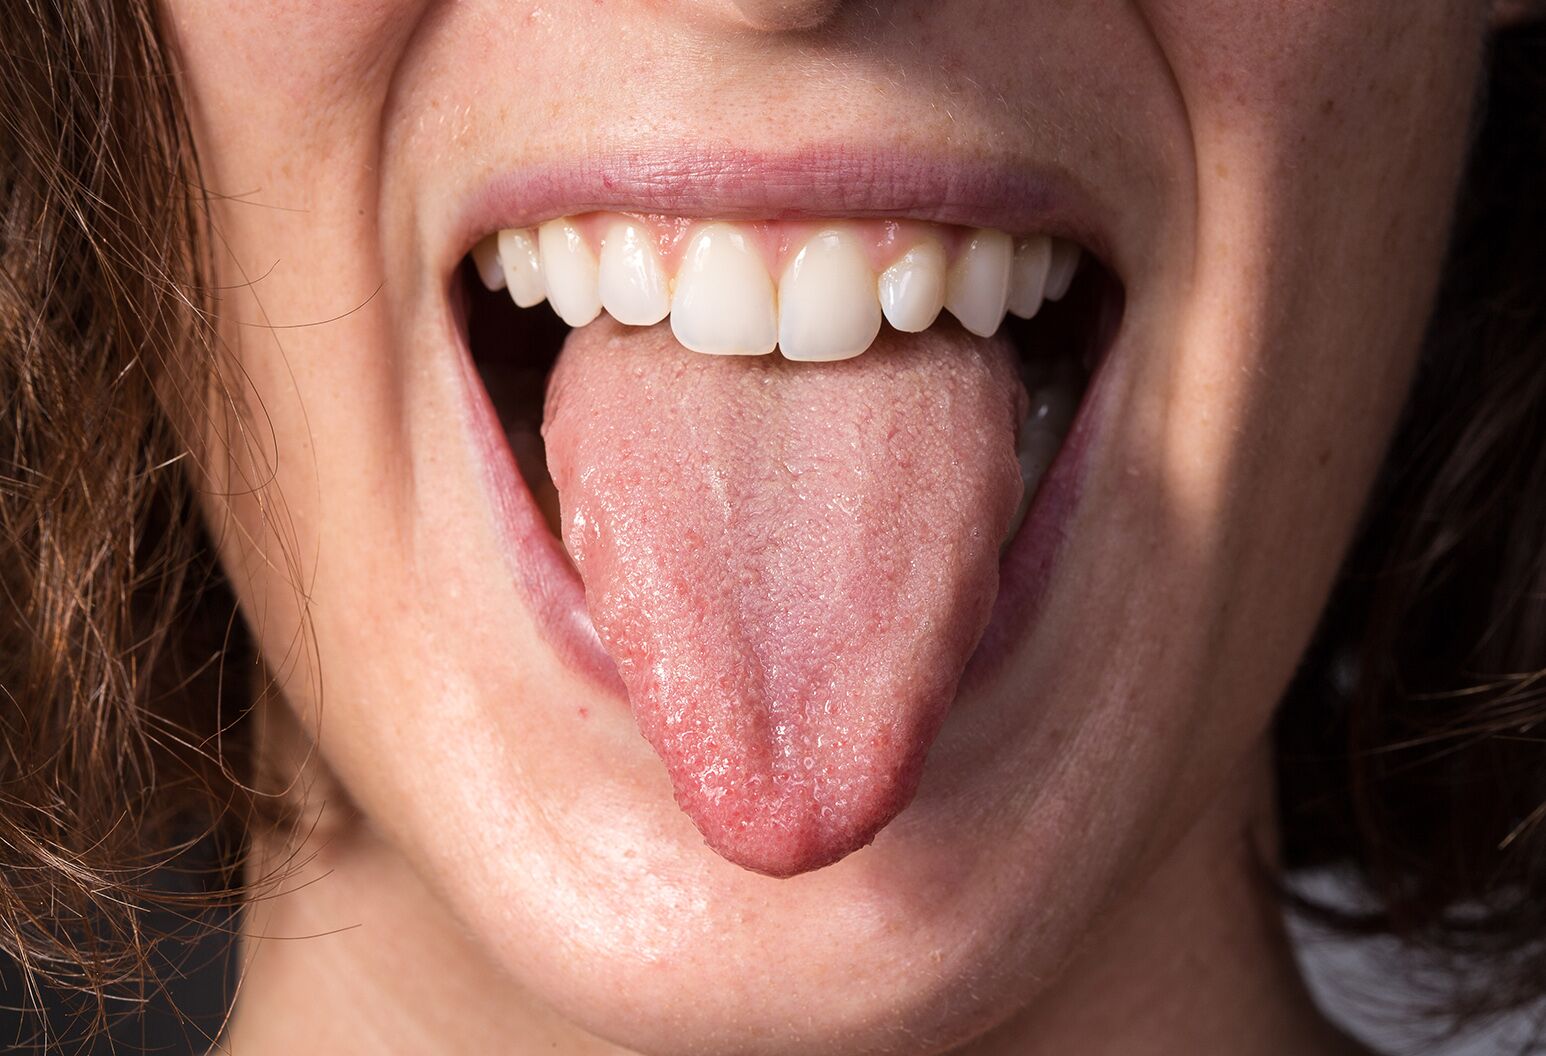 Sore Tongue After Drinking Alcohol